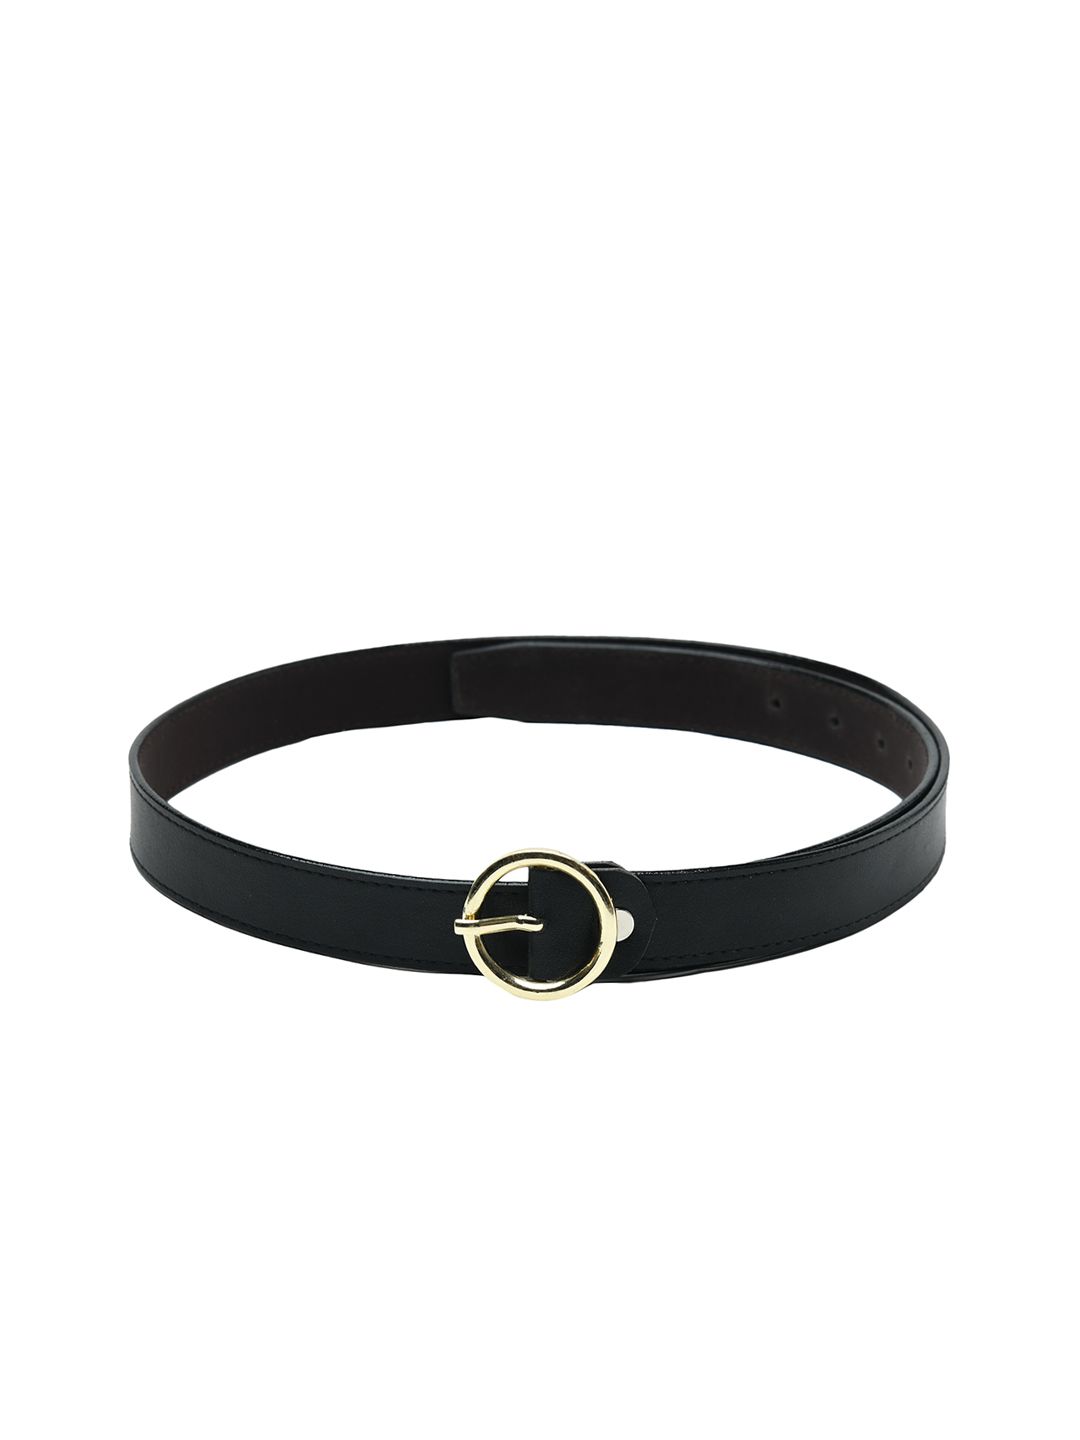 WINSOME DEAL Women Black & Gold-Toned Solid Belt Price in India